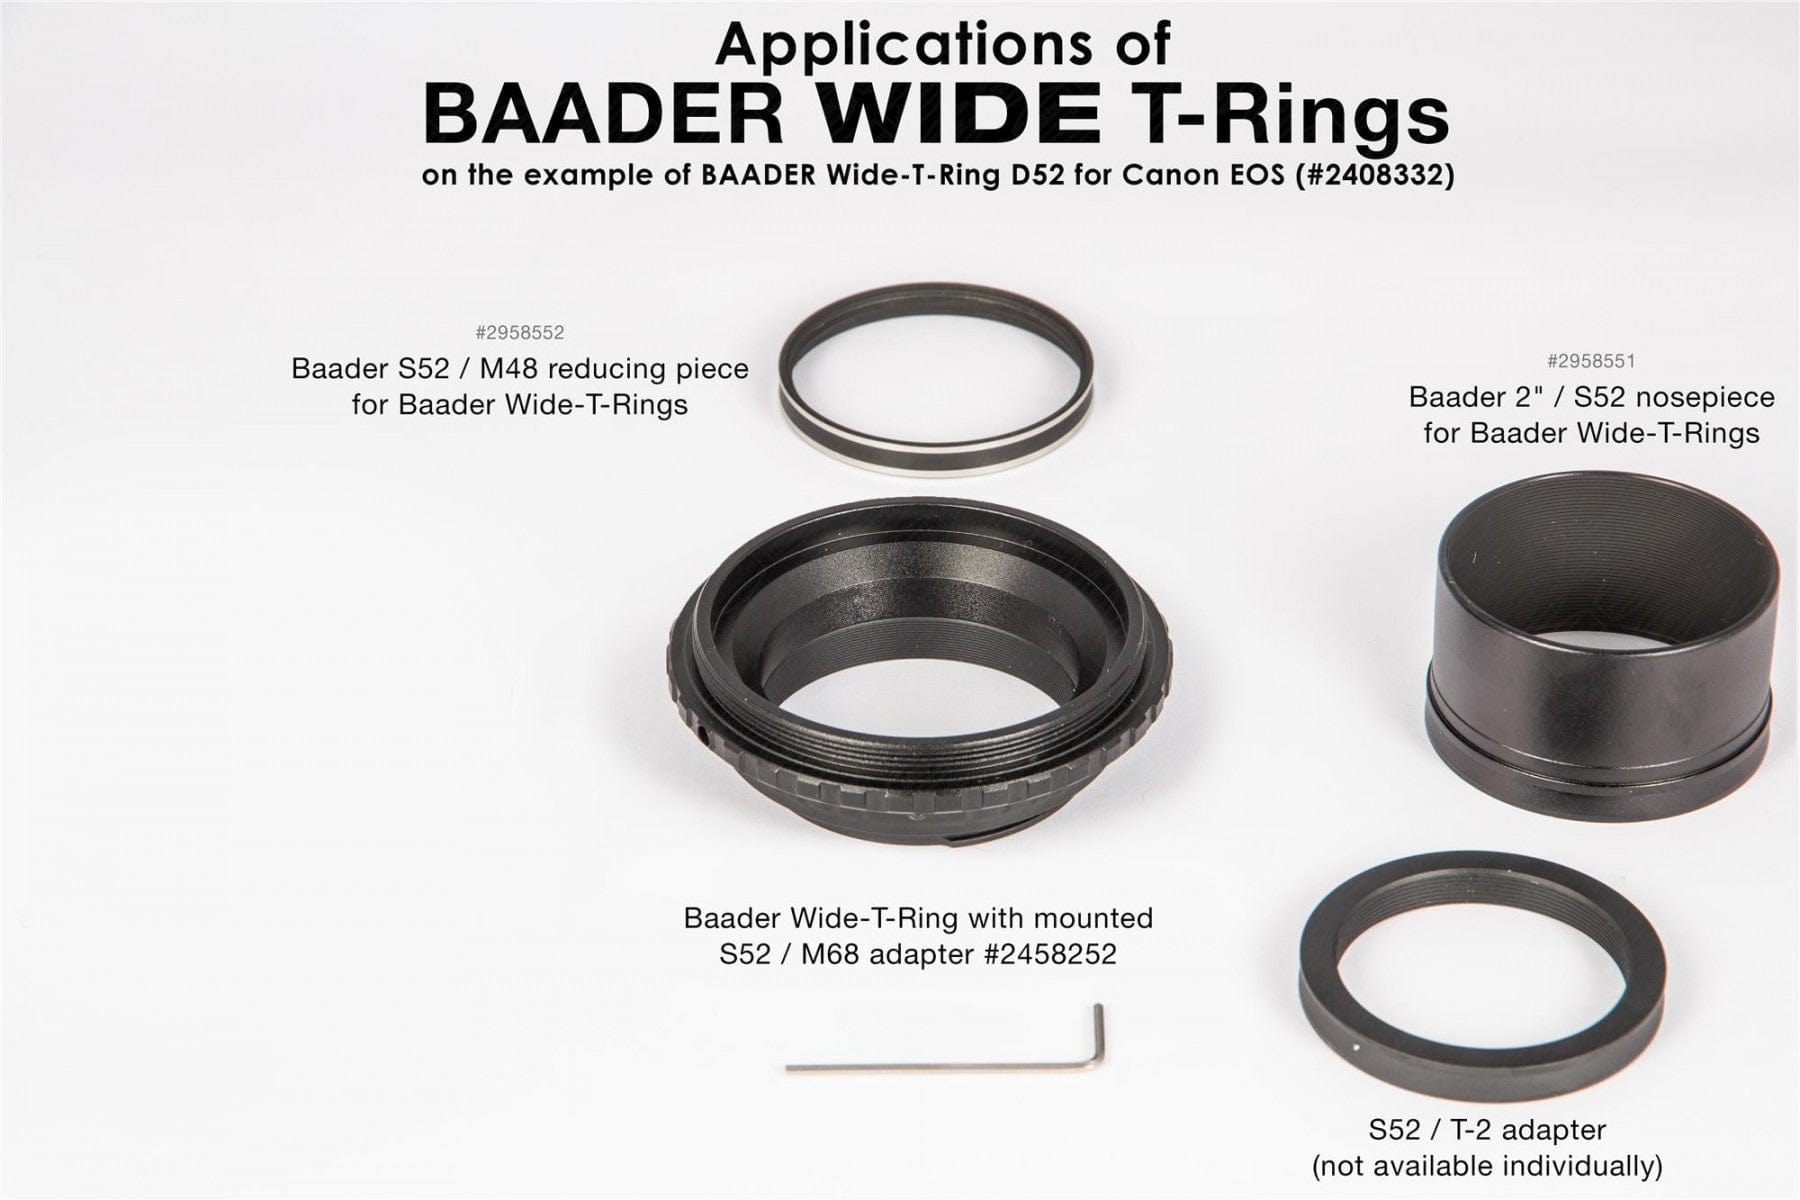 Baader Planetarium Accessory Baader Wide T-Ring Sony Alpha and Minolta Maxxum with D52i to T-2 and S52 - 2408334